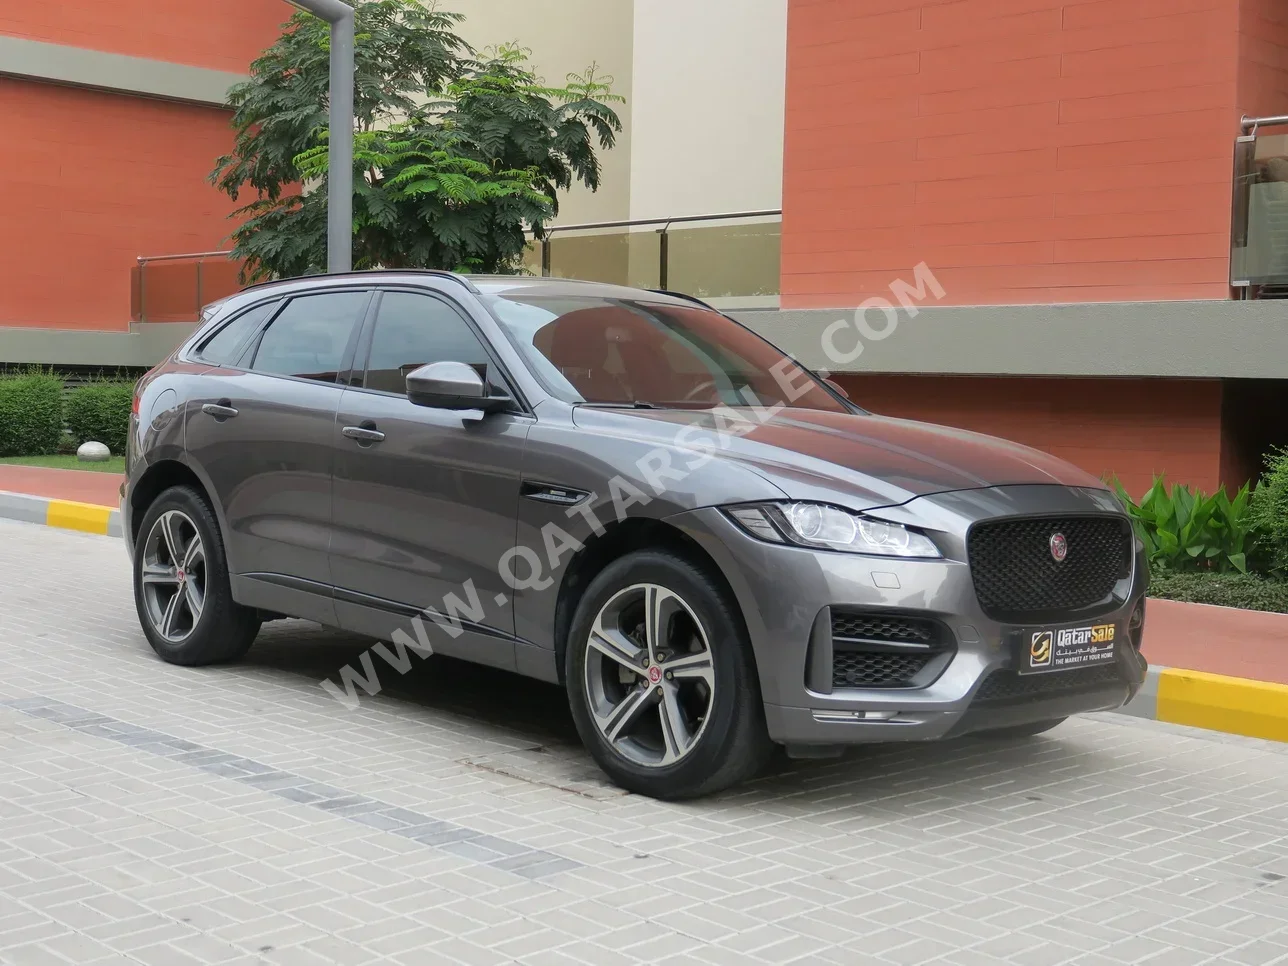 Jaguar  F-Pace  2018  Automatic  53,000 Km  4 Cylinder  Four Wheel Drive (4WD)  SUV  Gray